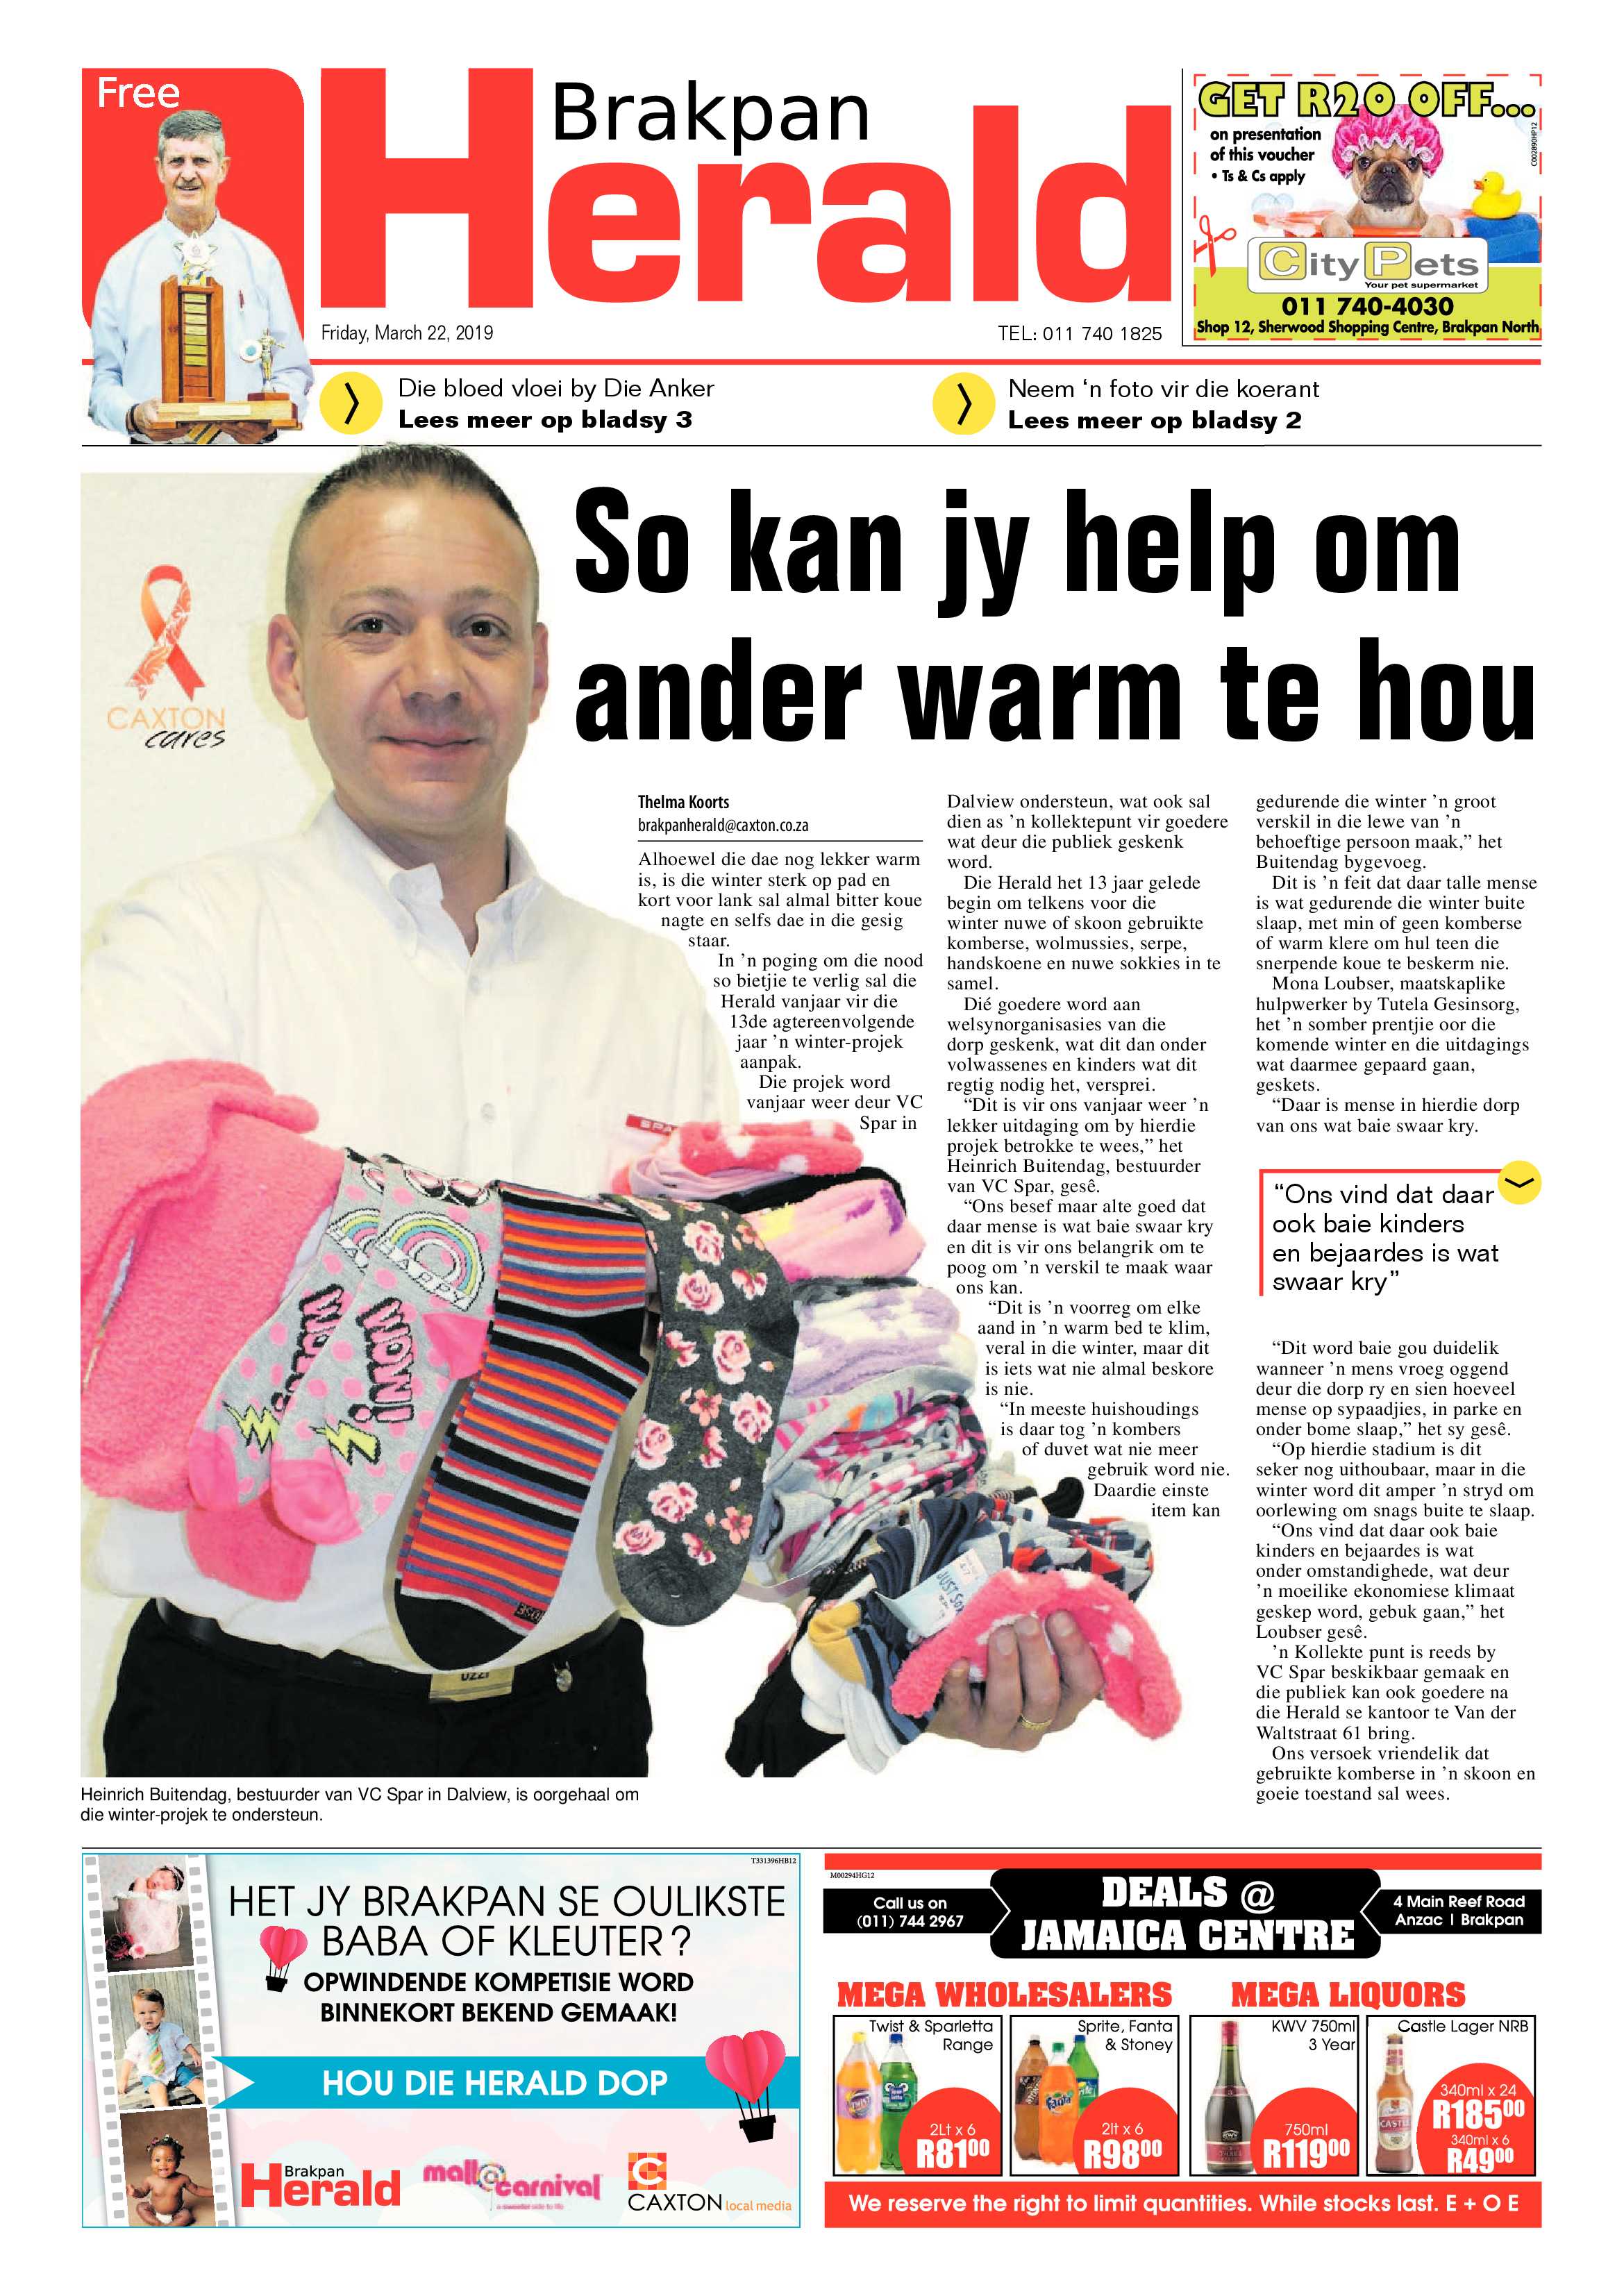 Brakpan Herald 22 March 2019 page 1